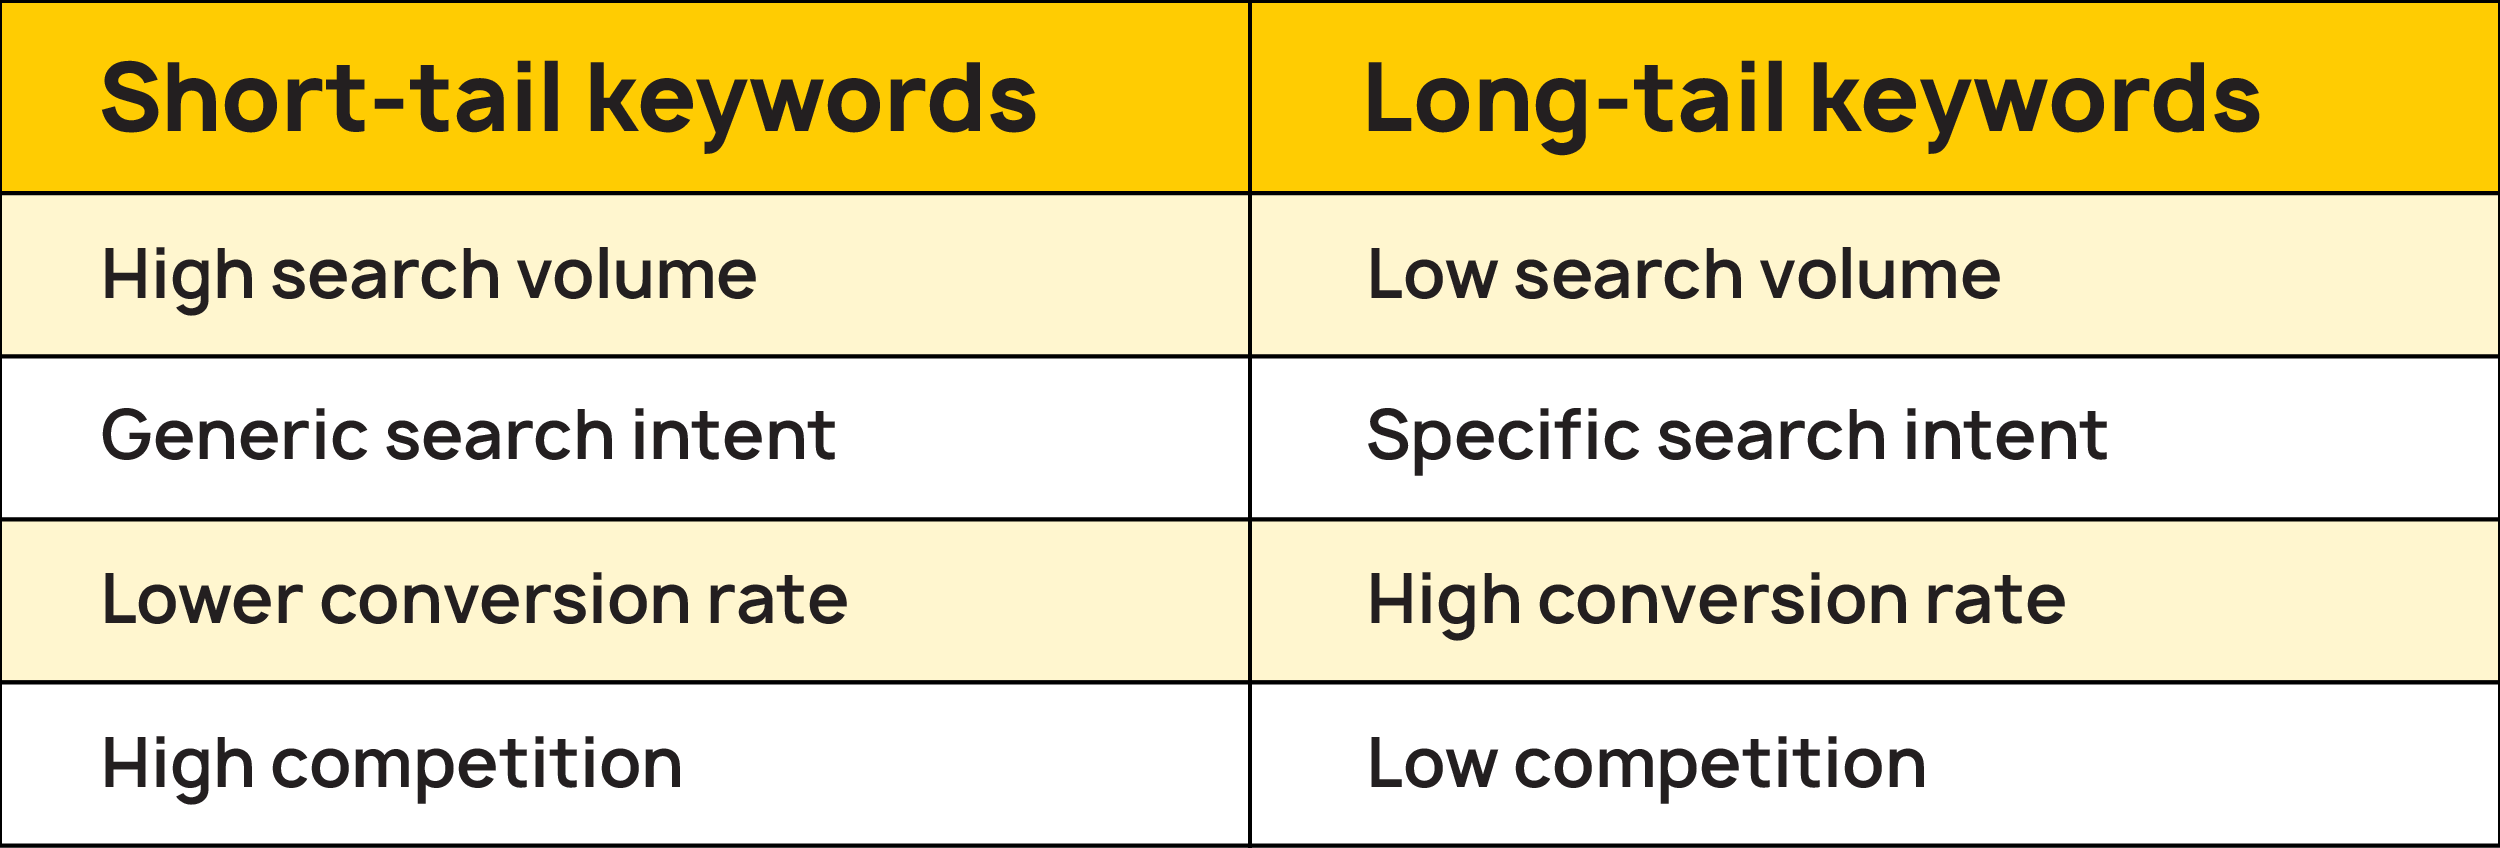 A table showing the differences of short-tail keywords and long-tail keywords.